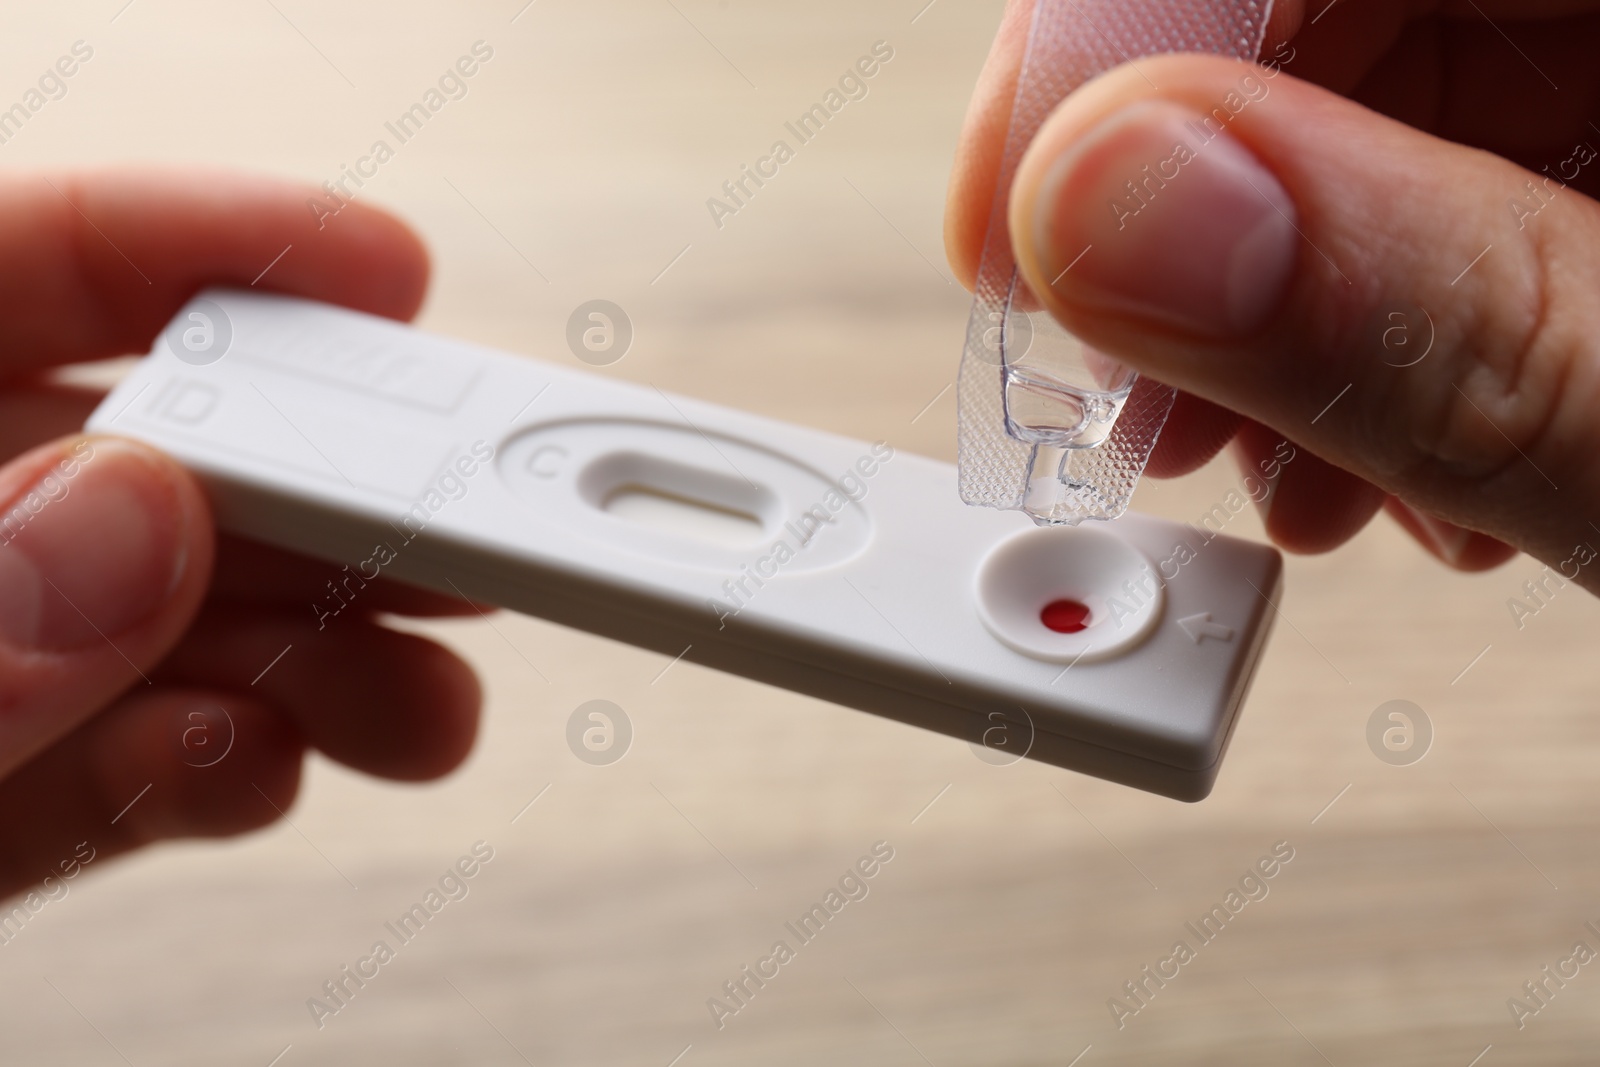 Photo of Woman dropping buffer solution onto disposable express test cassette on blurred background, closeup